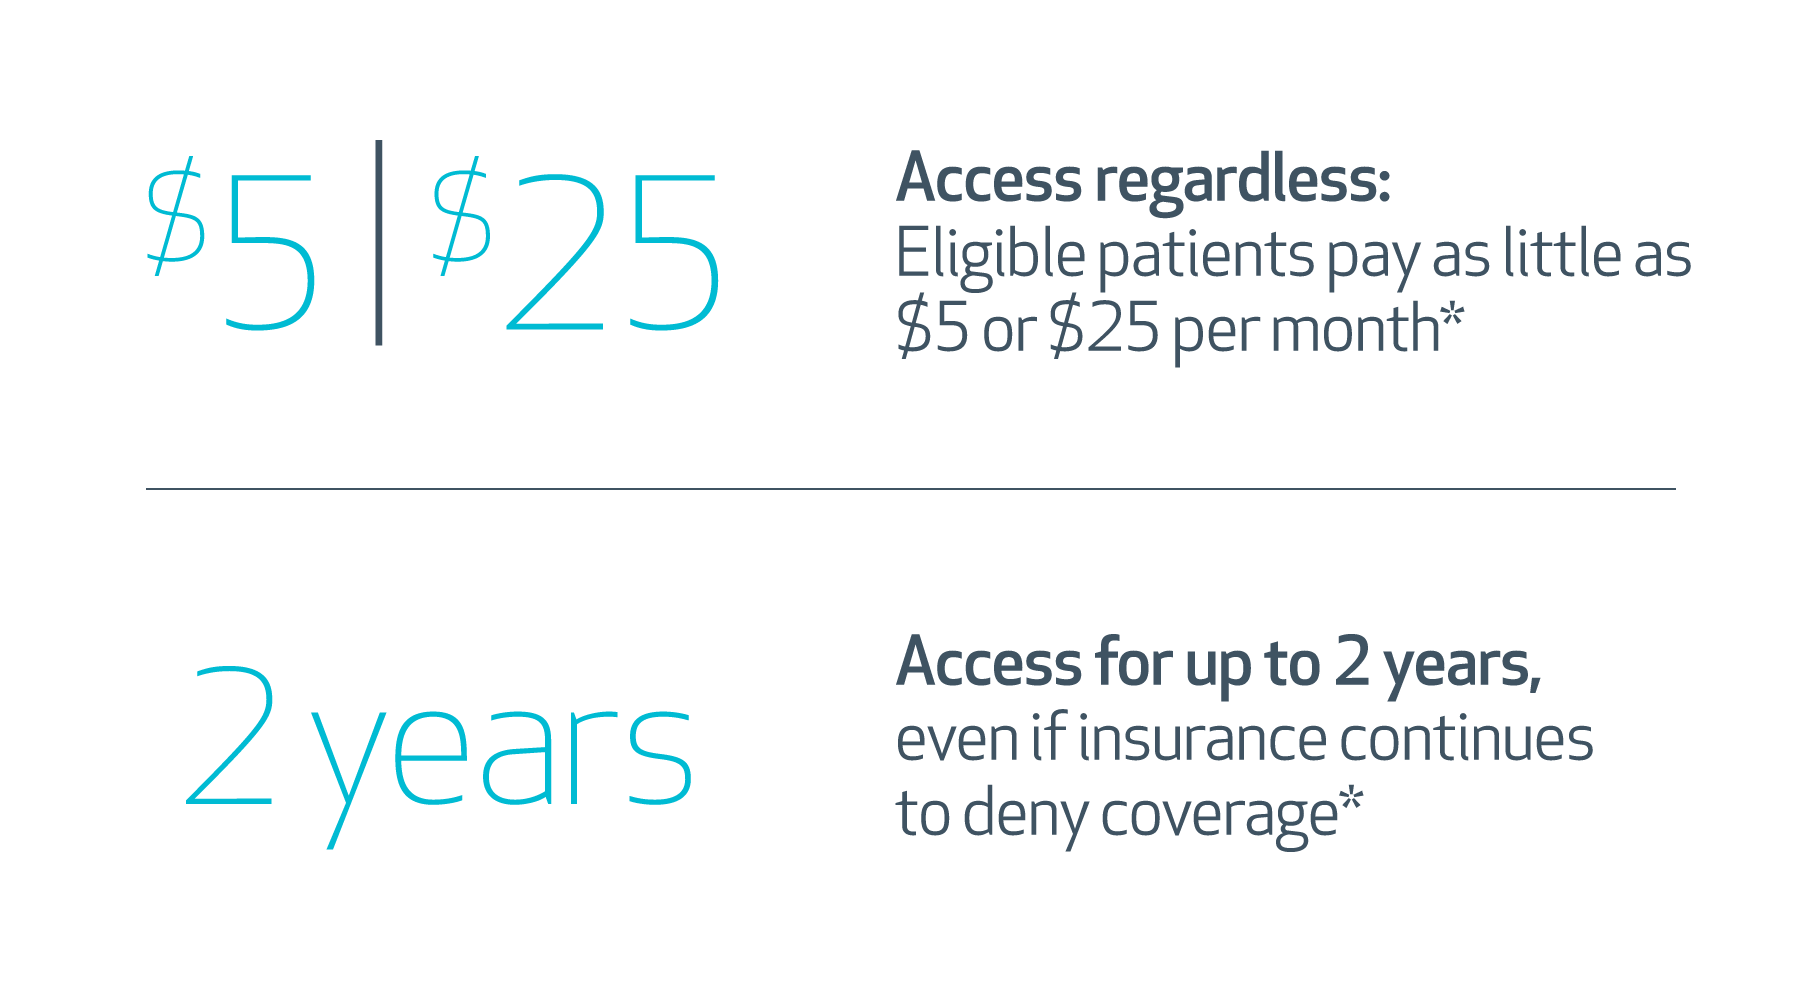 Access and savings for patients